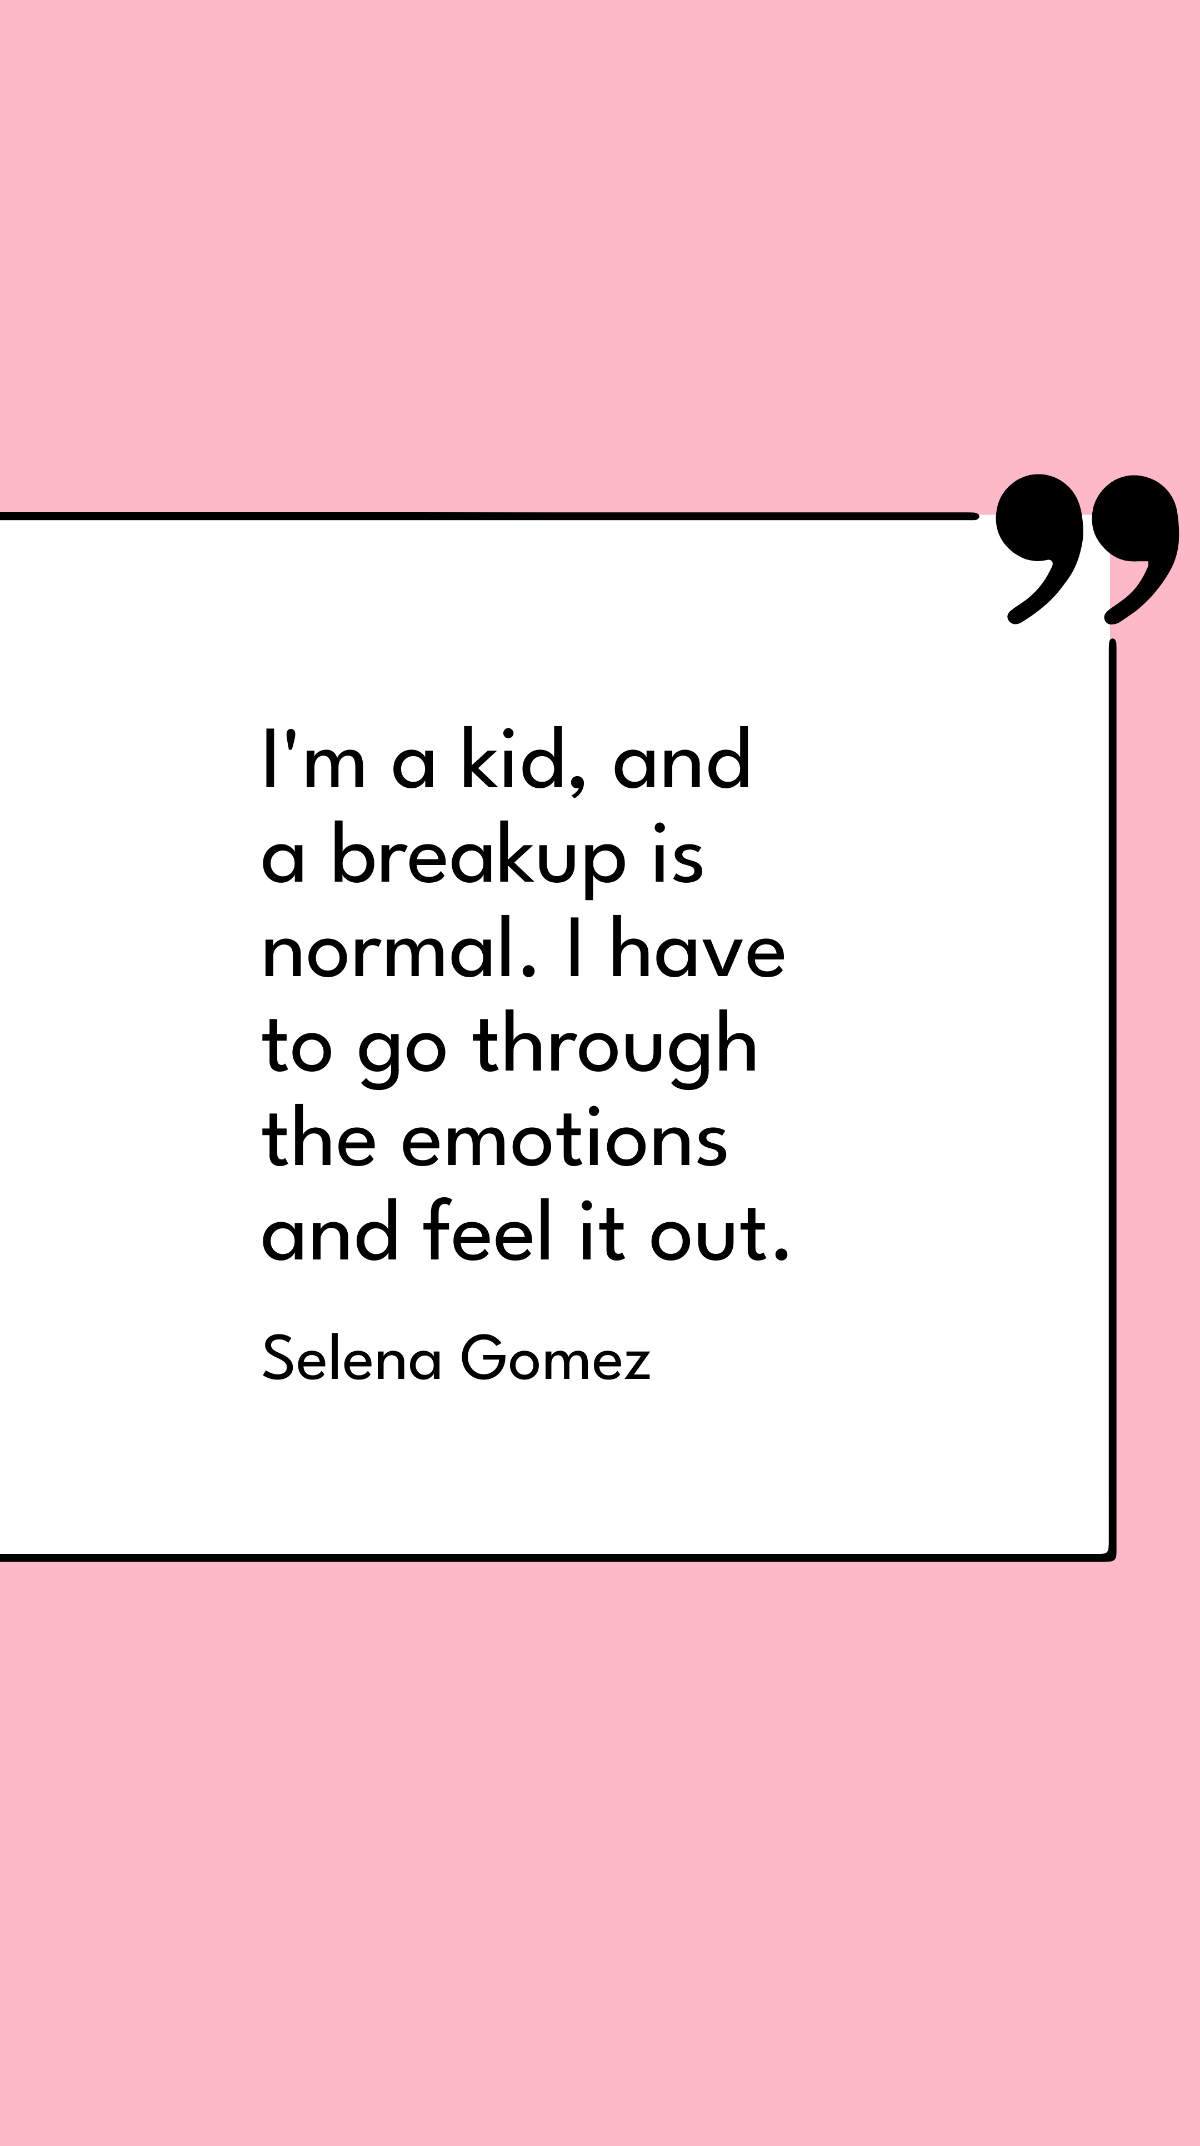 Selena Gomez - I'm a kid, and a breakup is normal. I have to go through the emotions and feel it out. Template